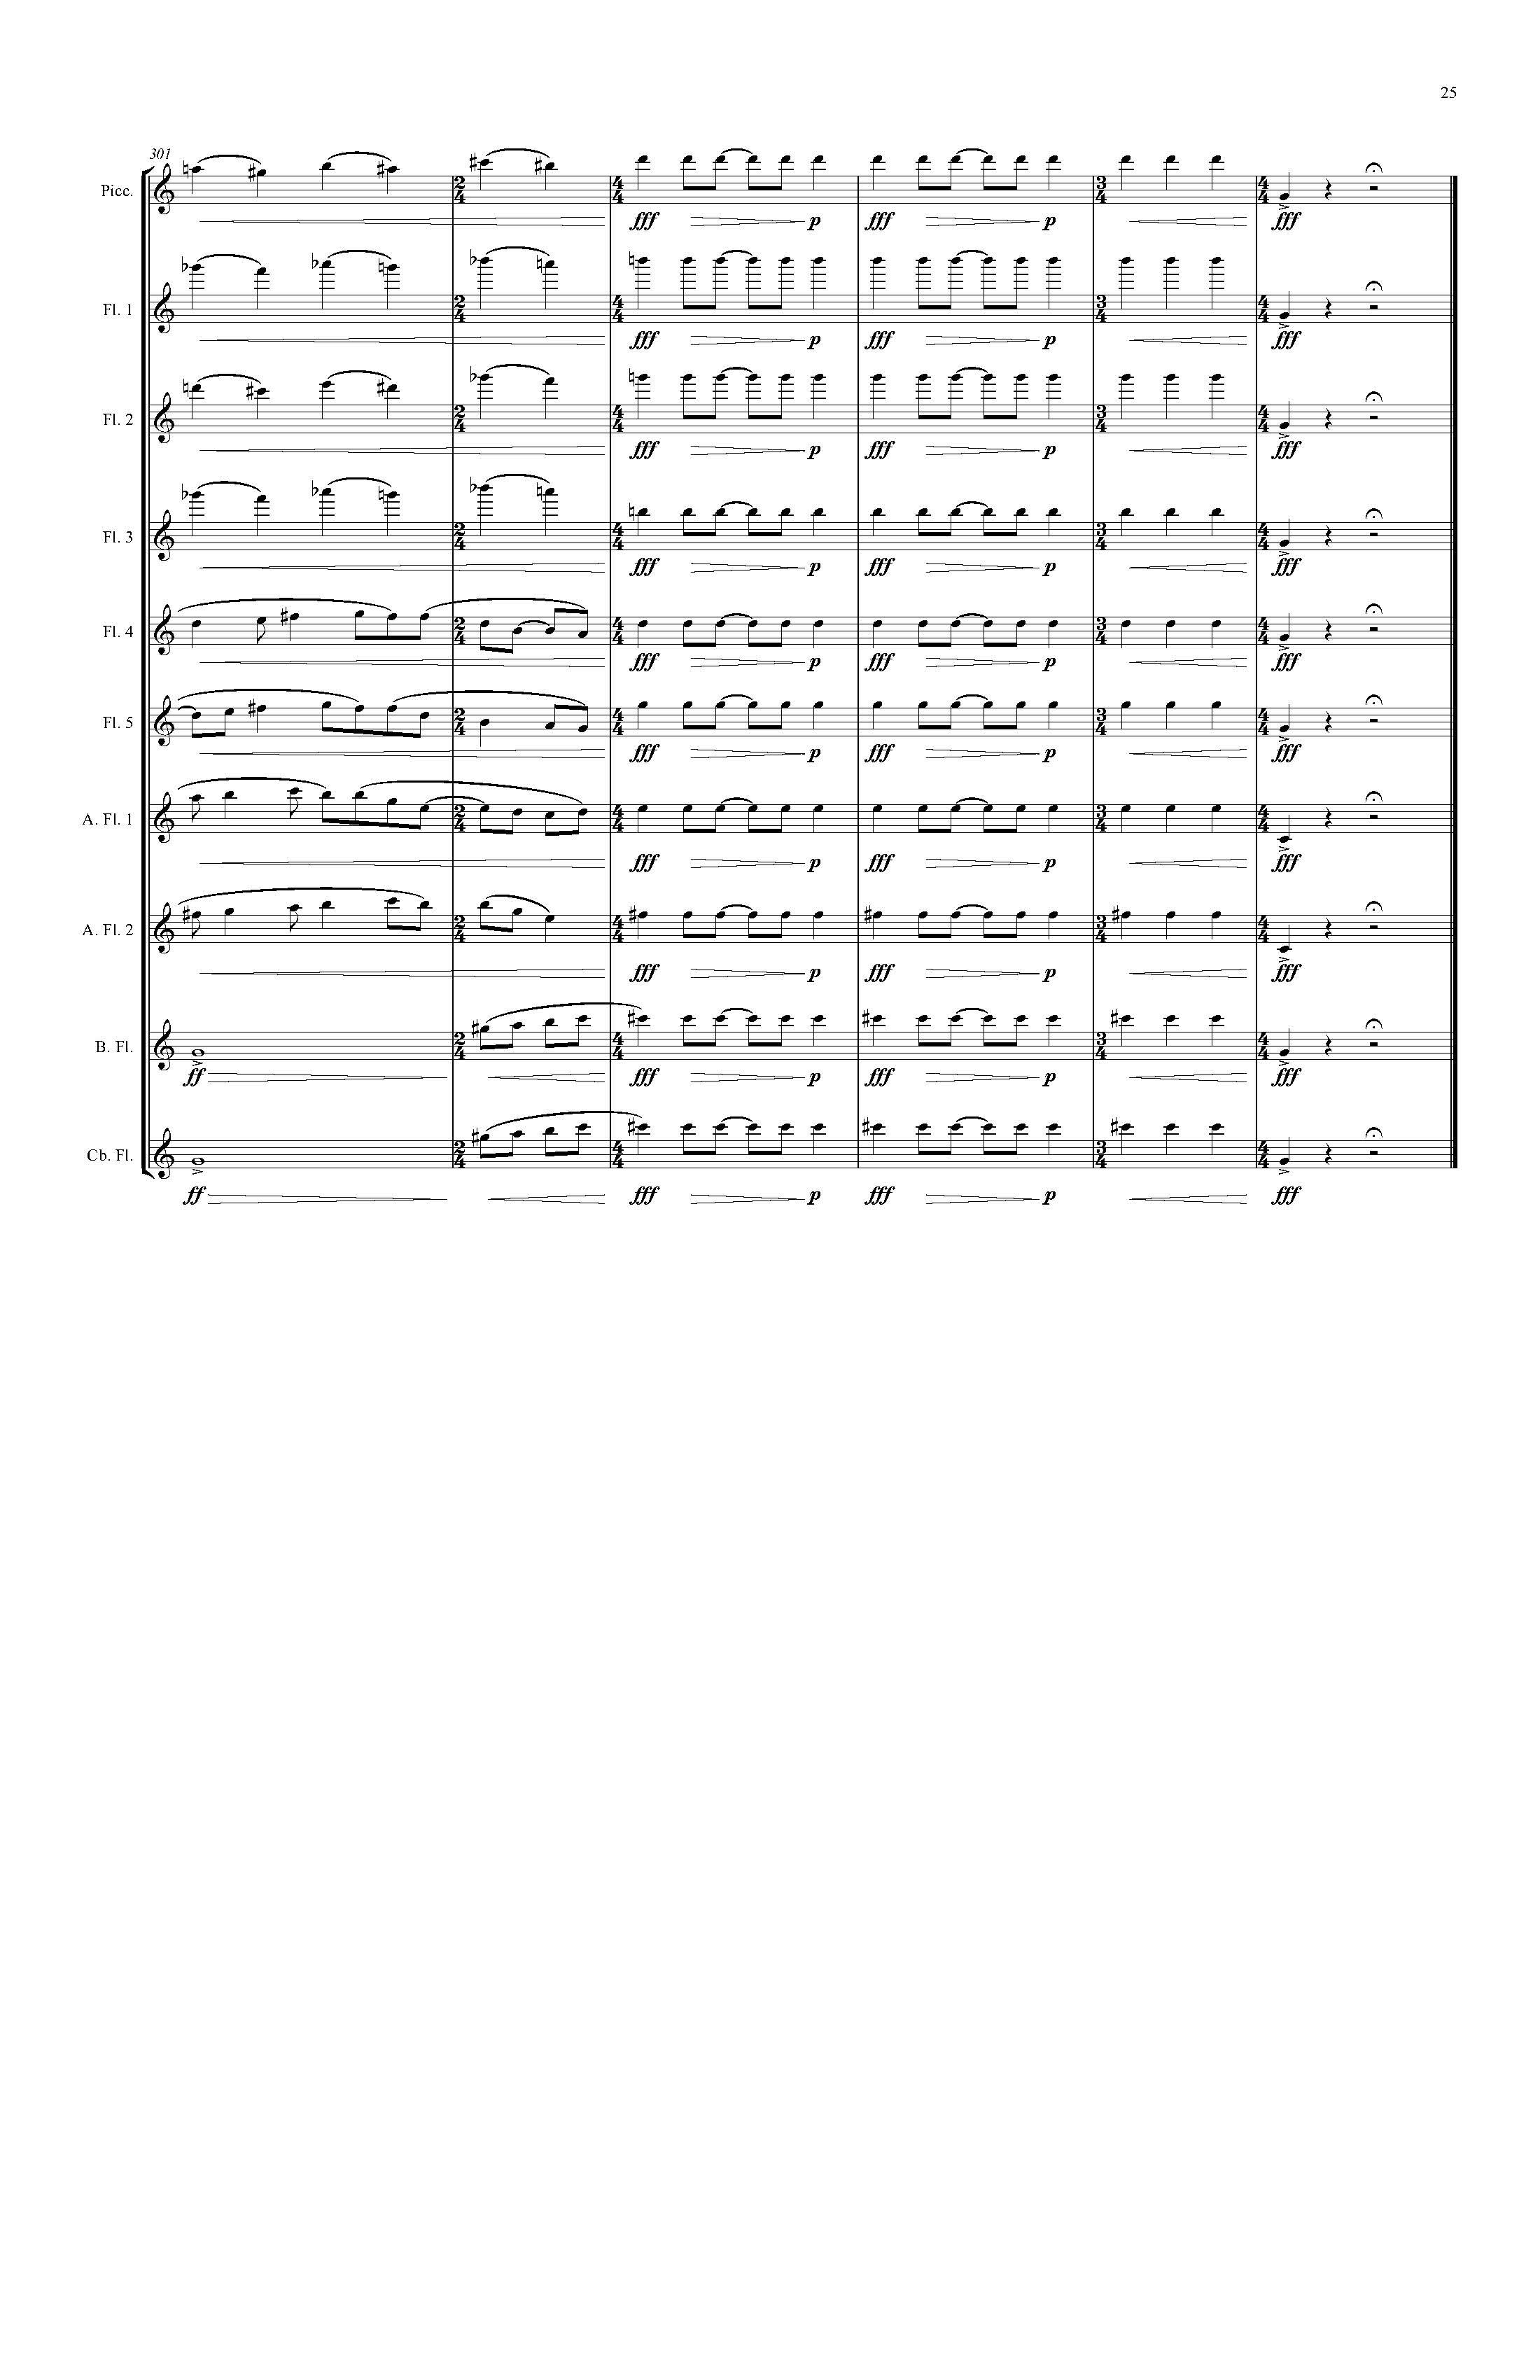 PIPES - Complete Score_Page_31.jpg